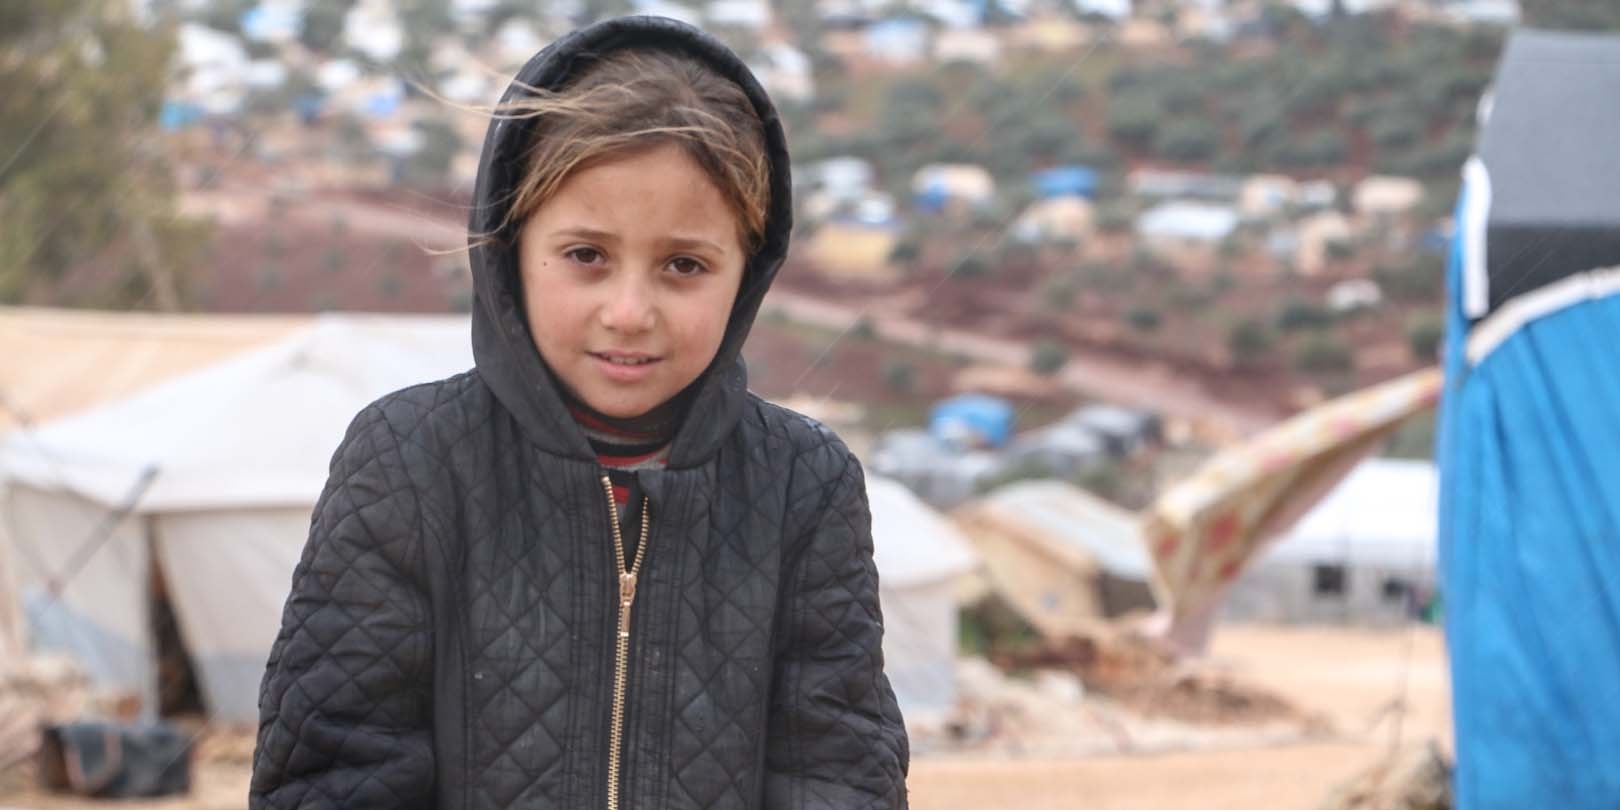 Northwest Syria, a little girl in a black winter coat, lives in a displacement camp